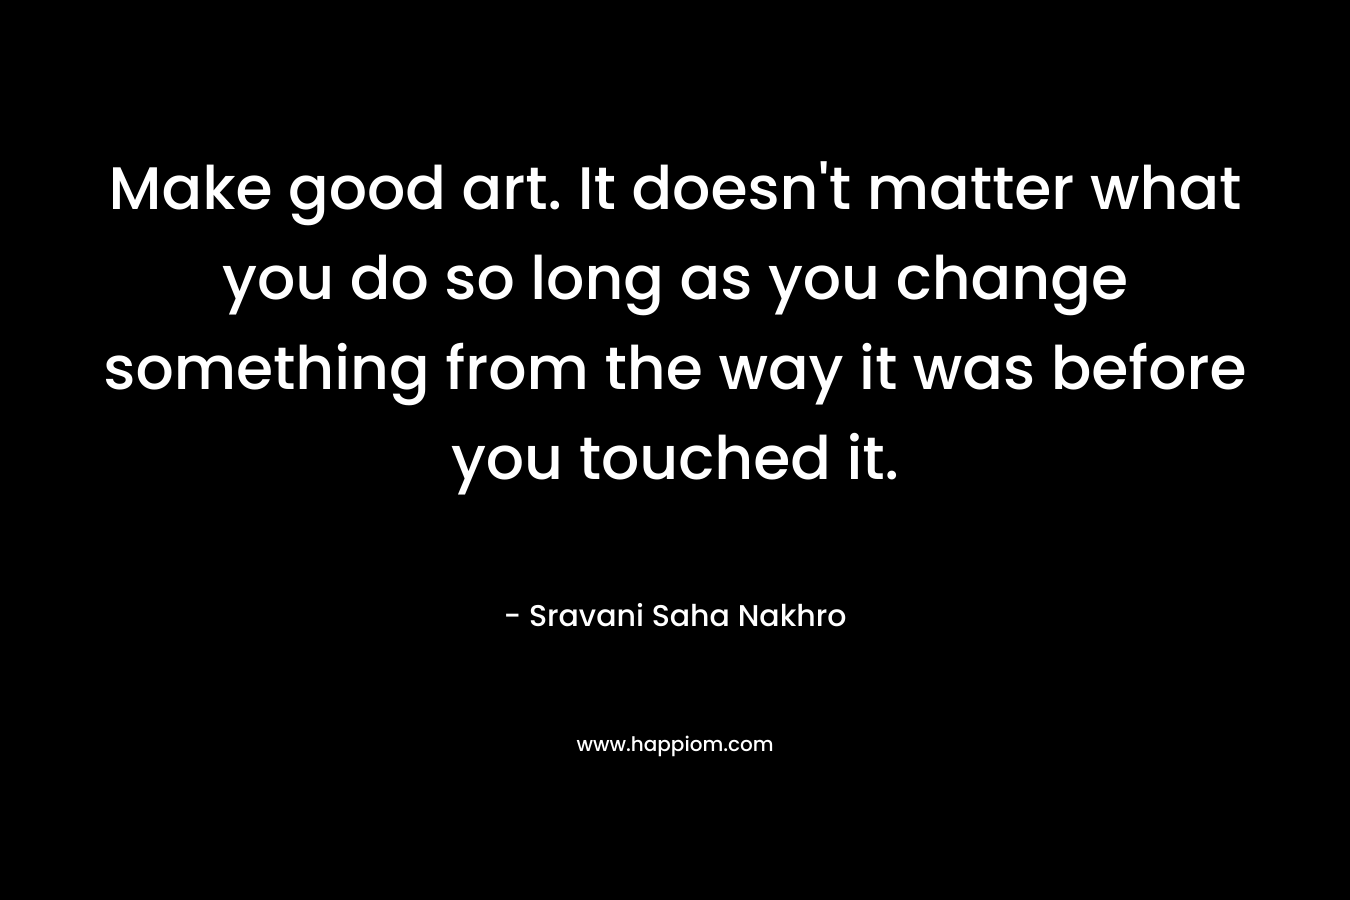 Make good art. It doesn't matter what you do so long as you change something from the way it was before you touched it.